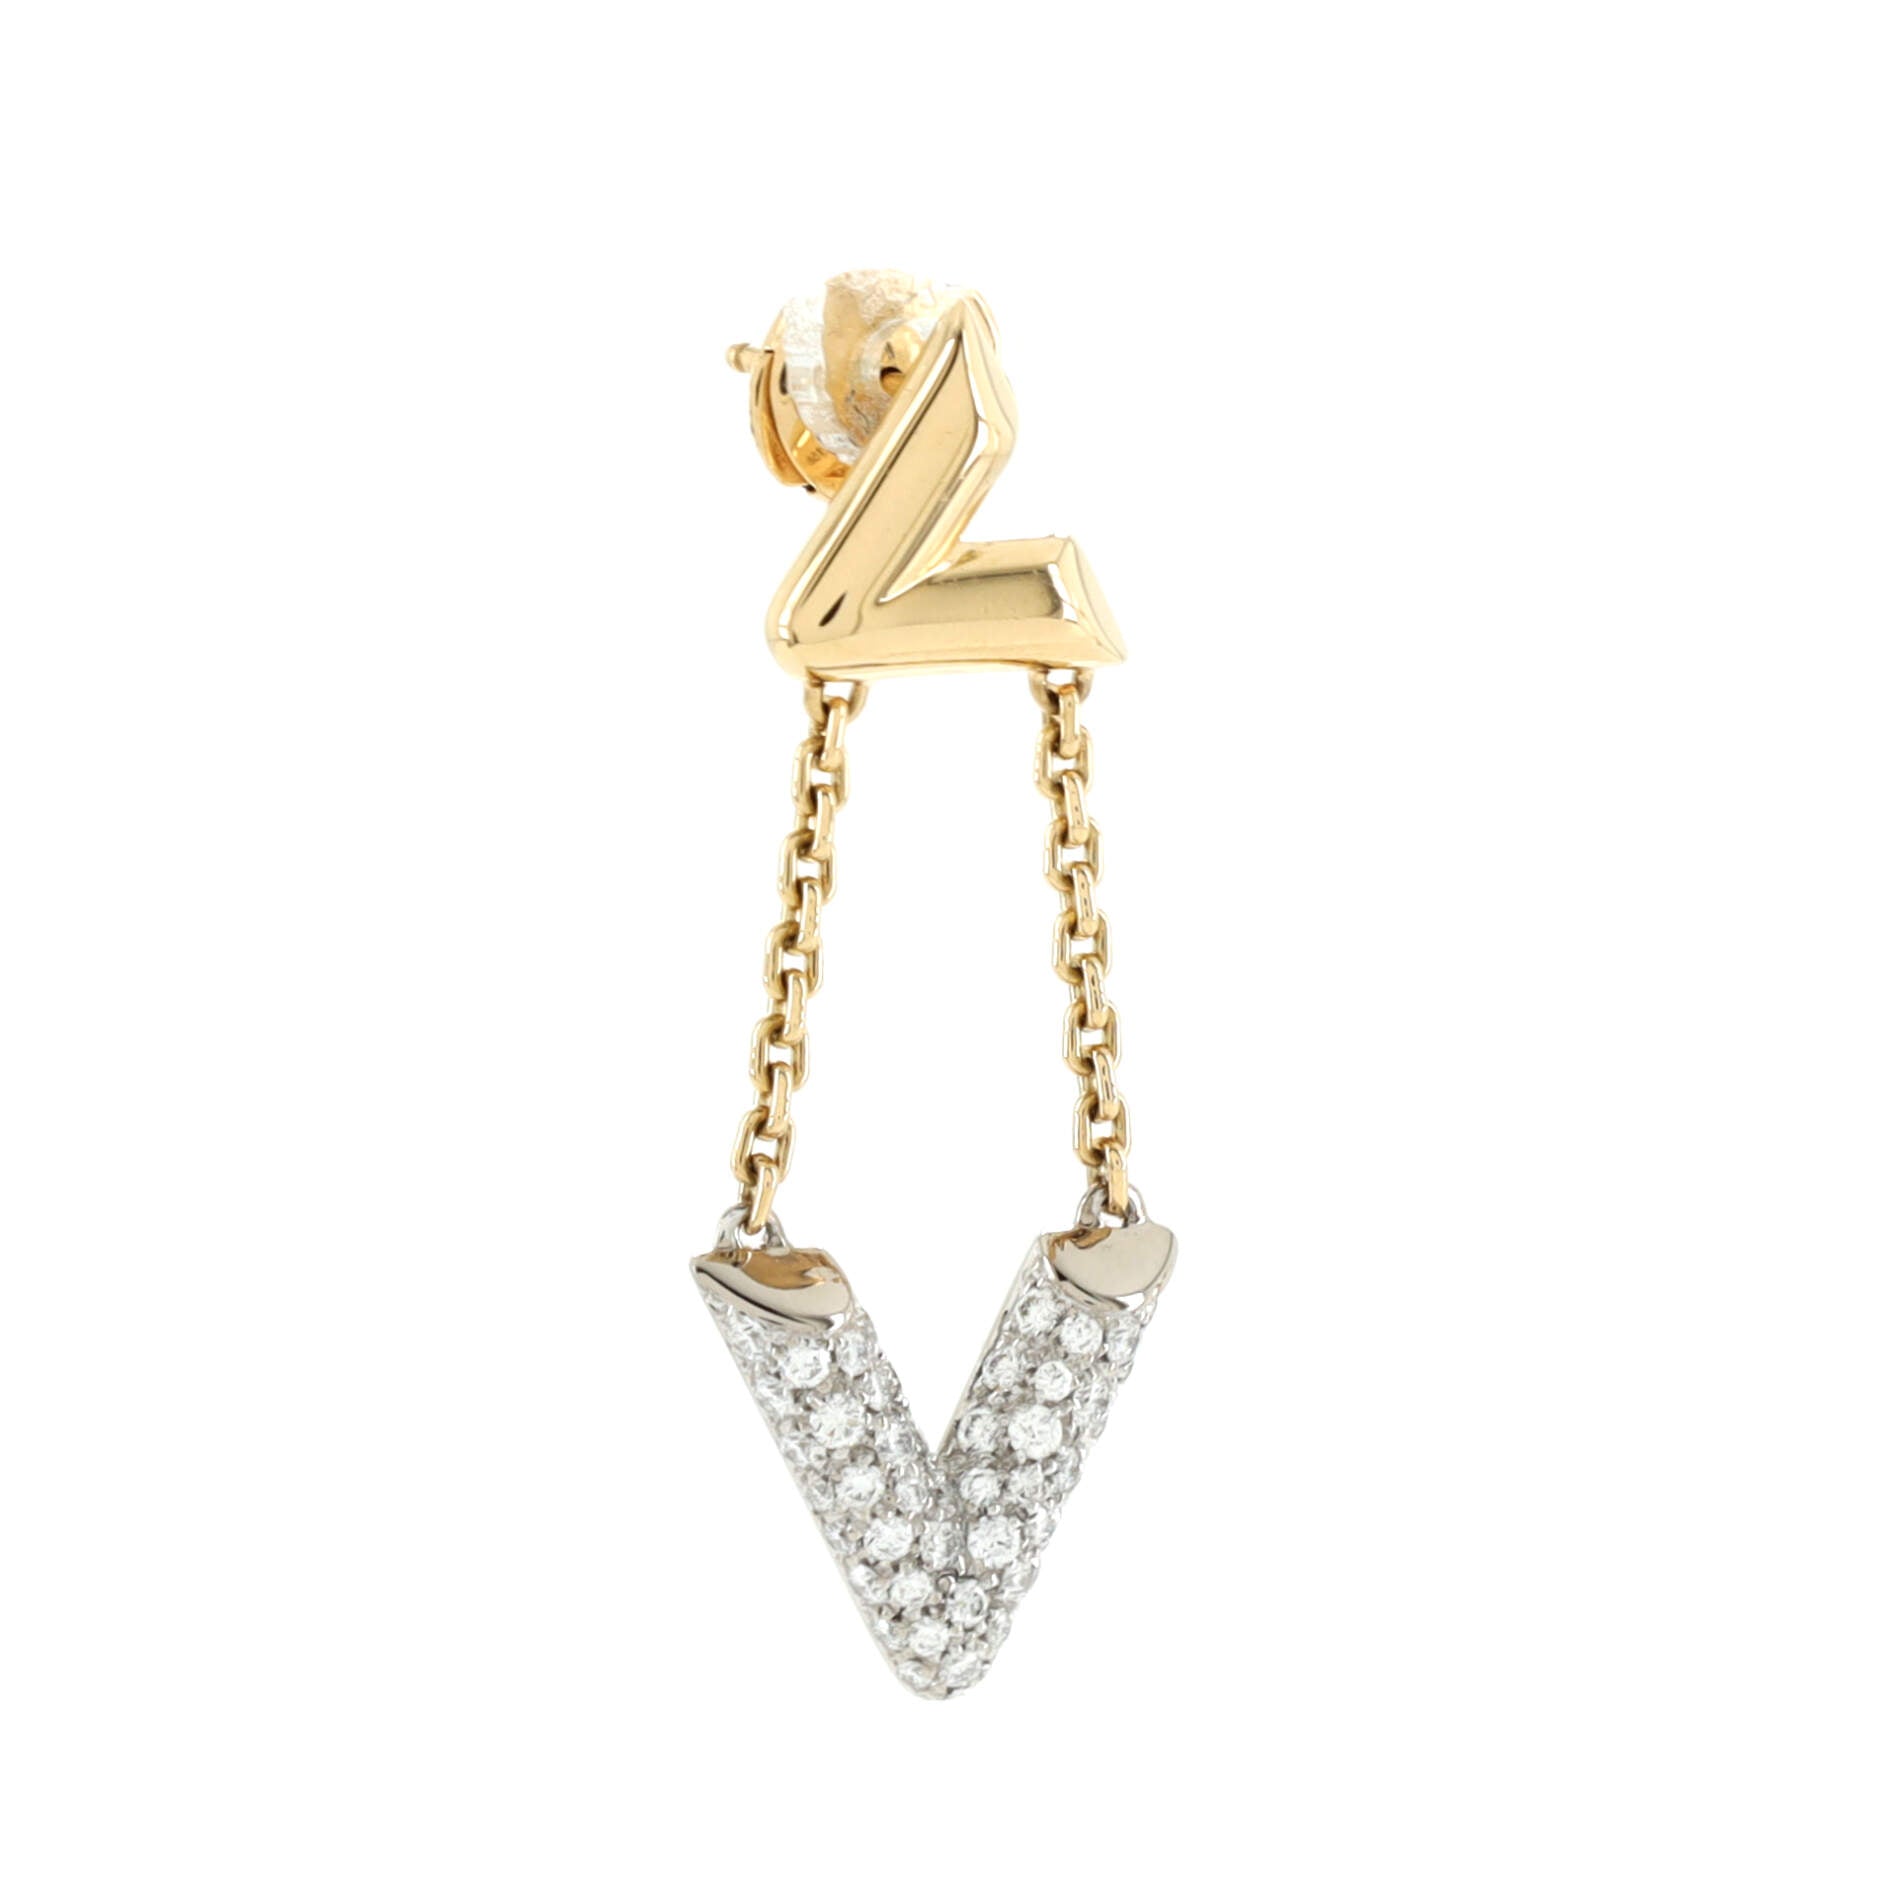 LOUIS VUITTON LV Volt Upside Down Earrings, Yellow Gold, White Gold And Diamonds Gold. Size Nsa